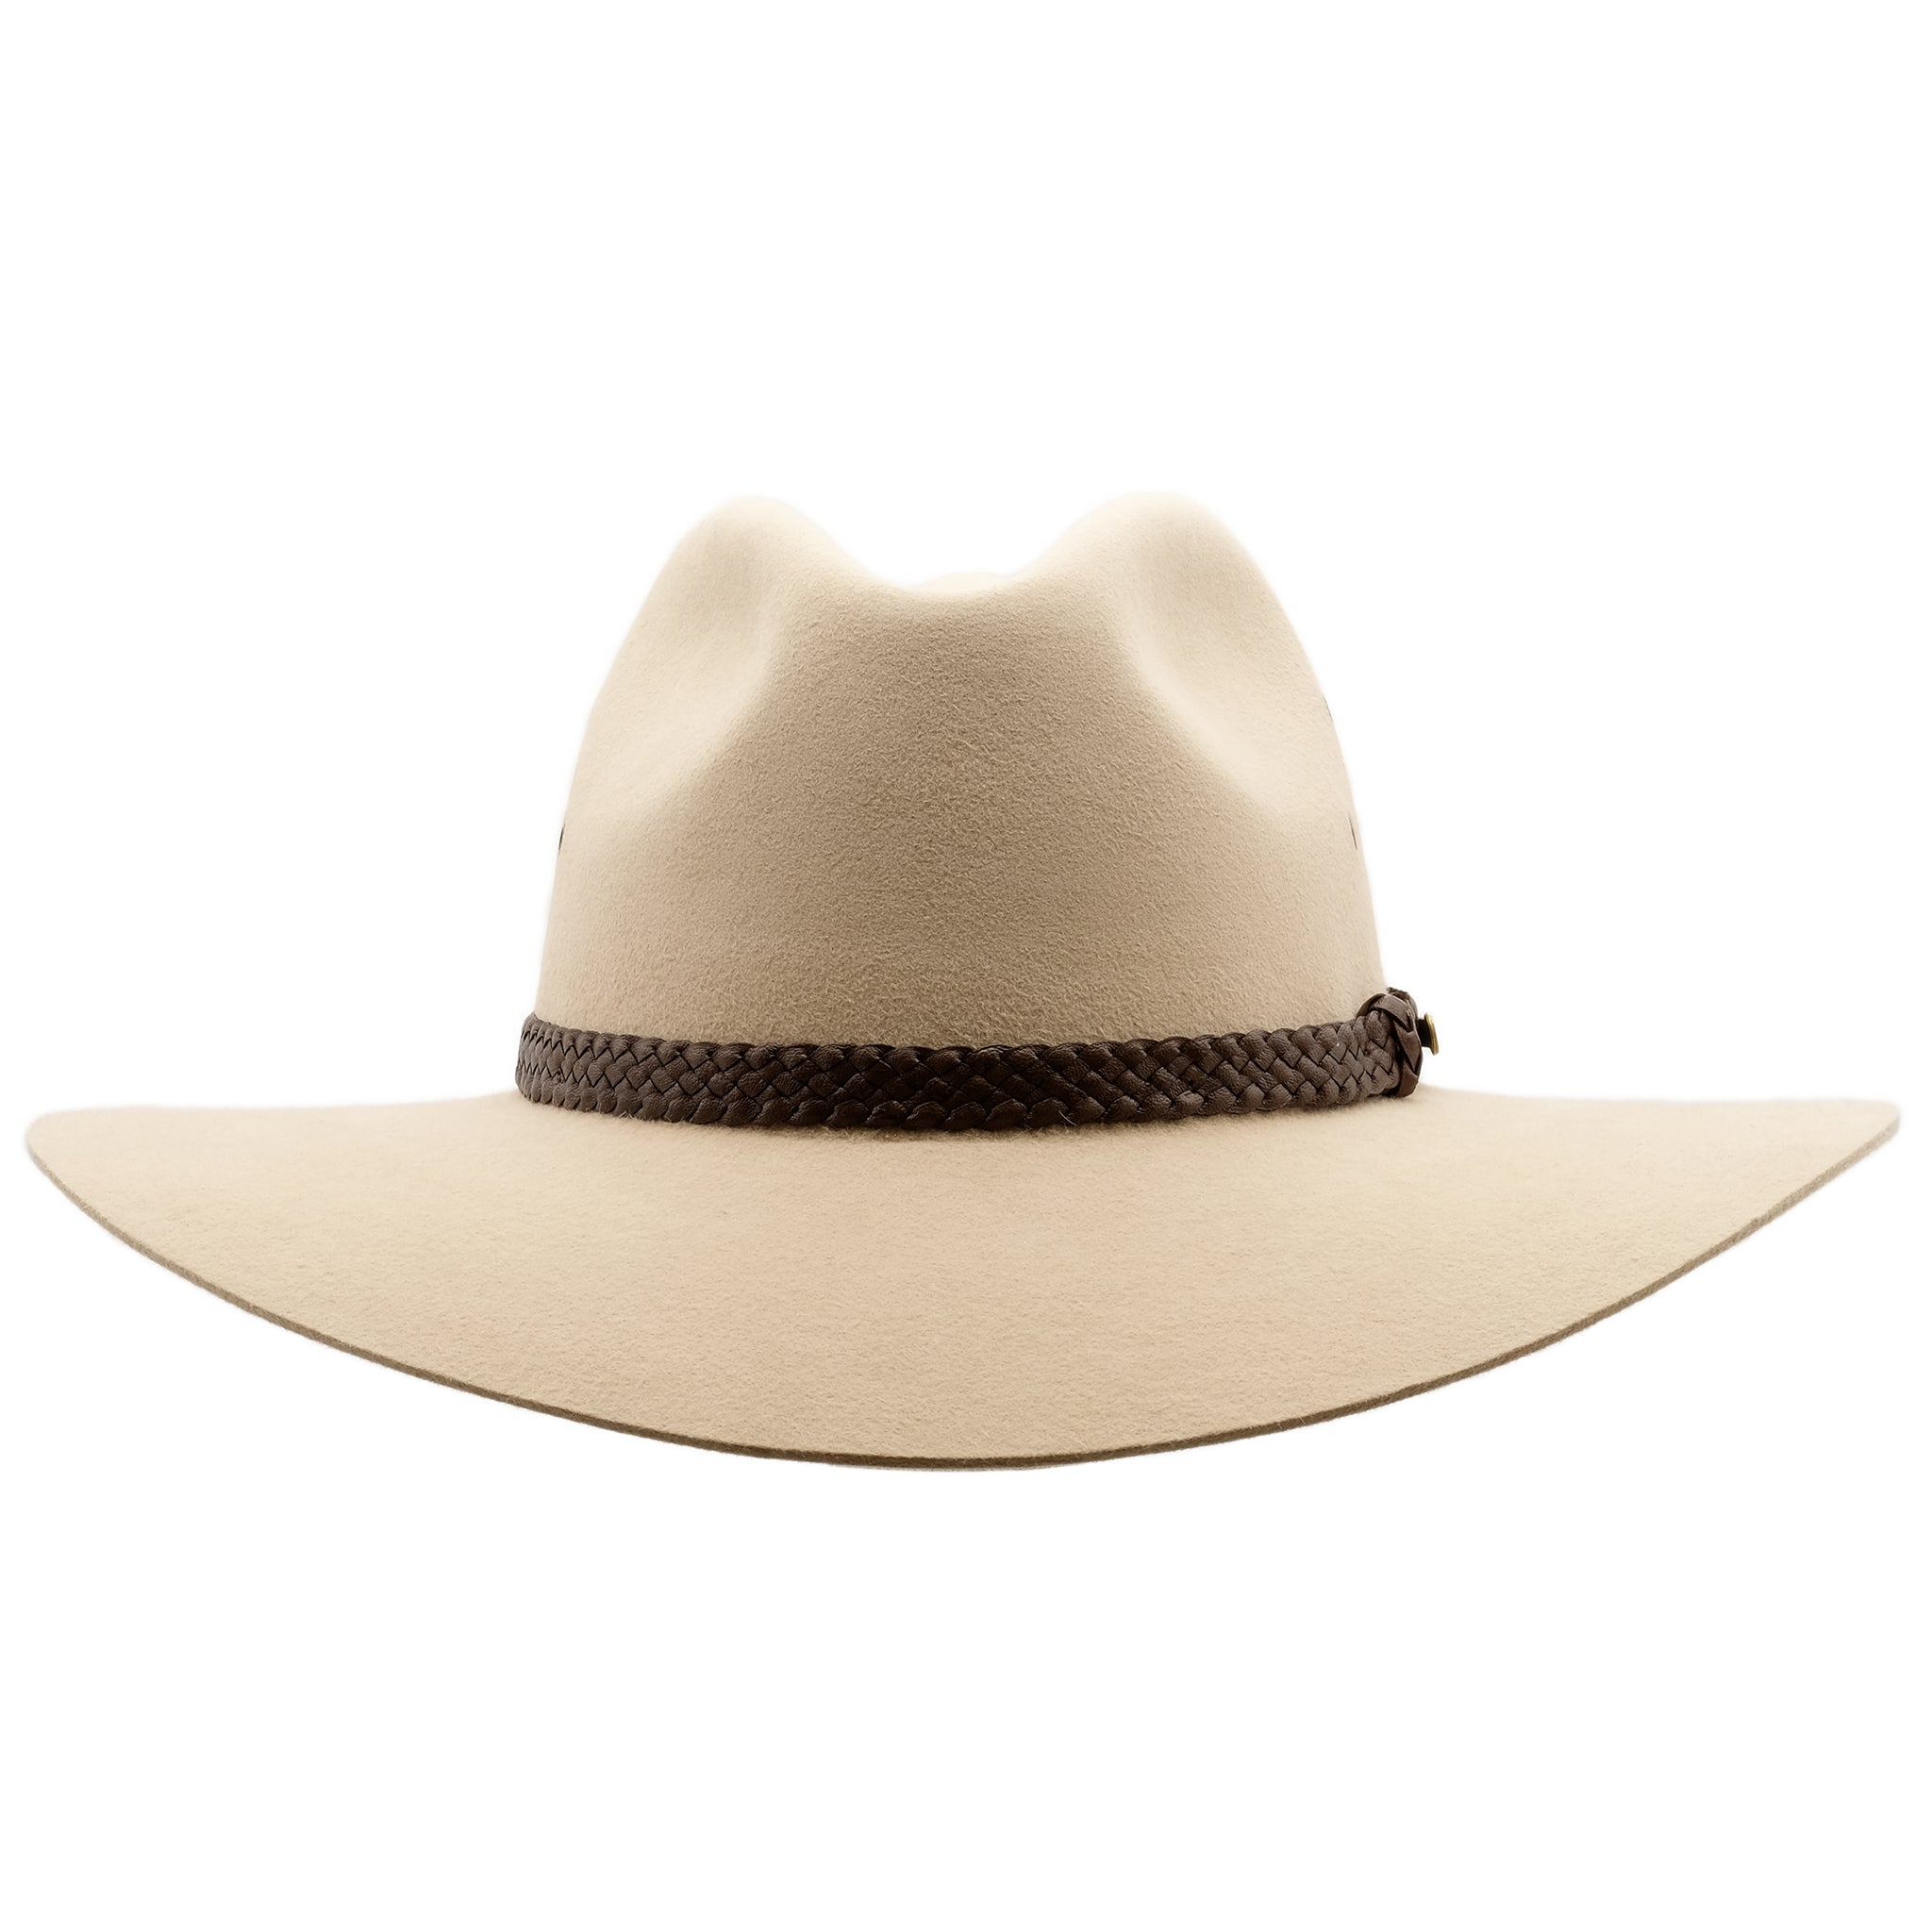 Front view of Akubra Riverina hat in Sand colour